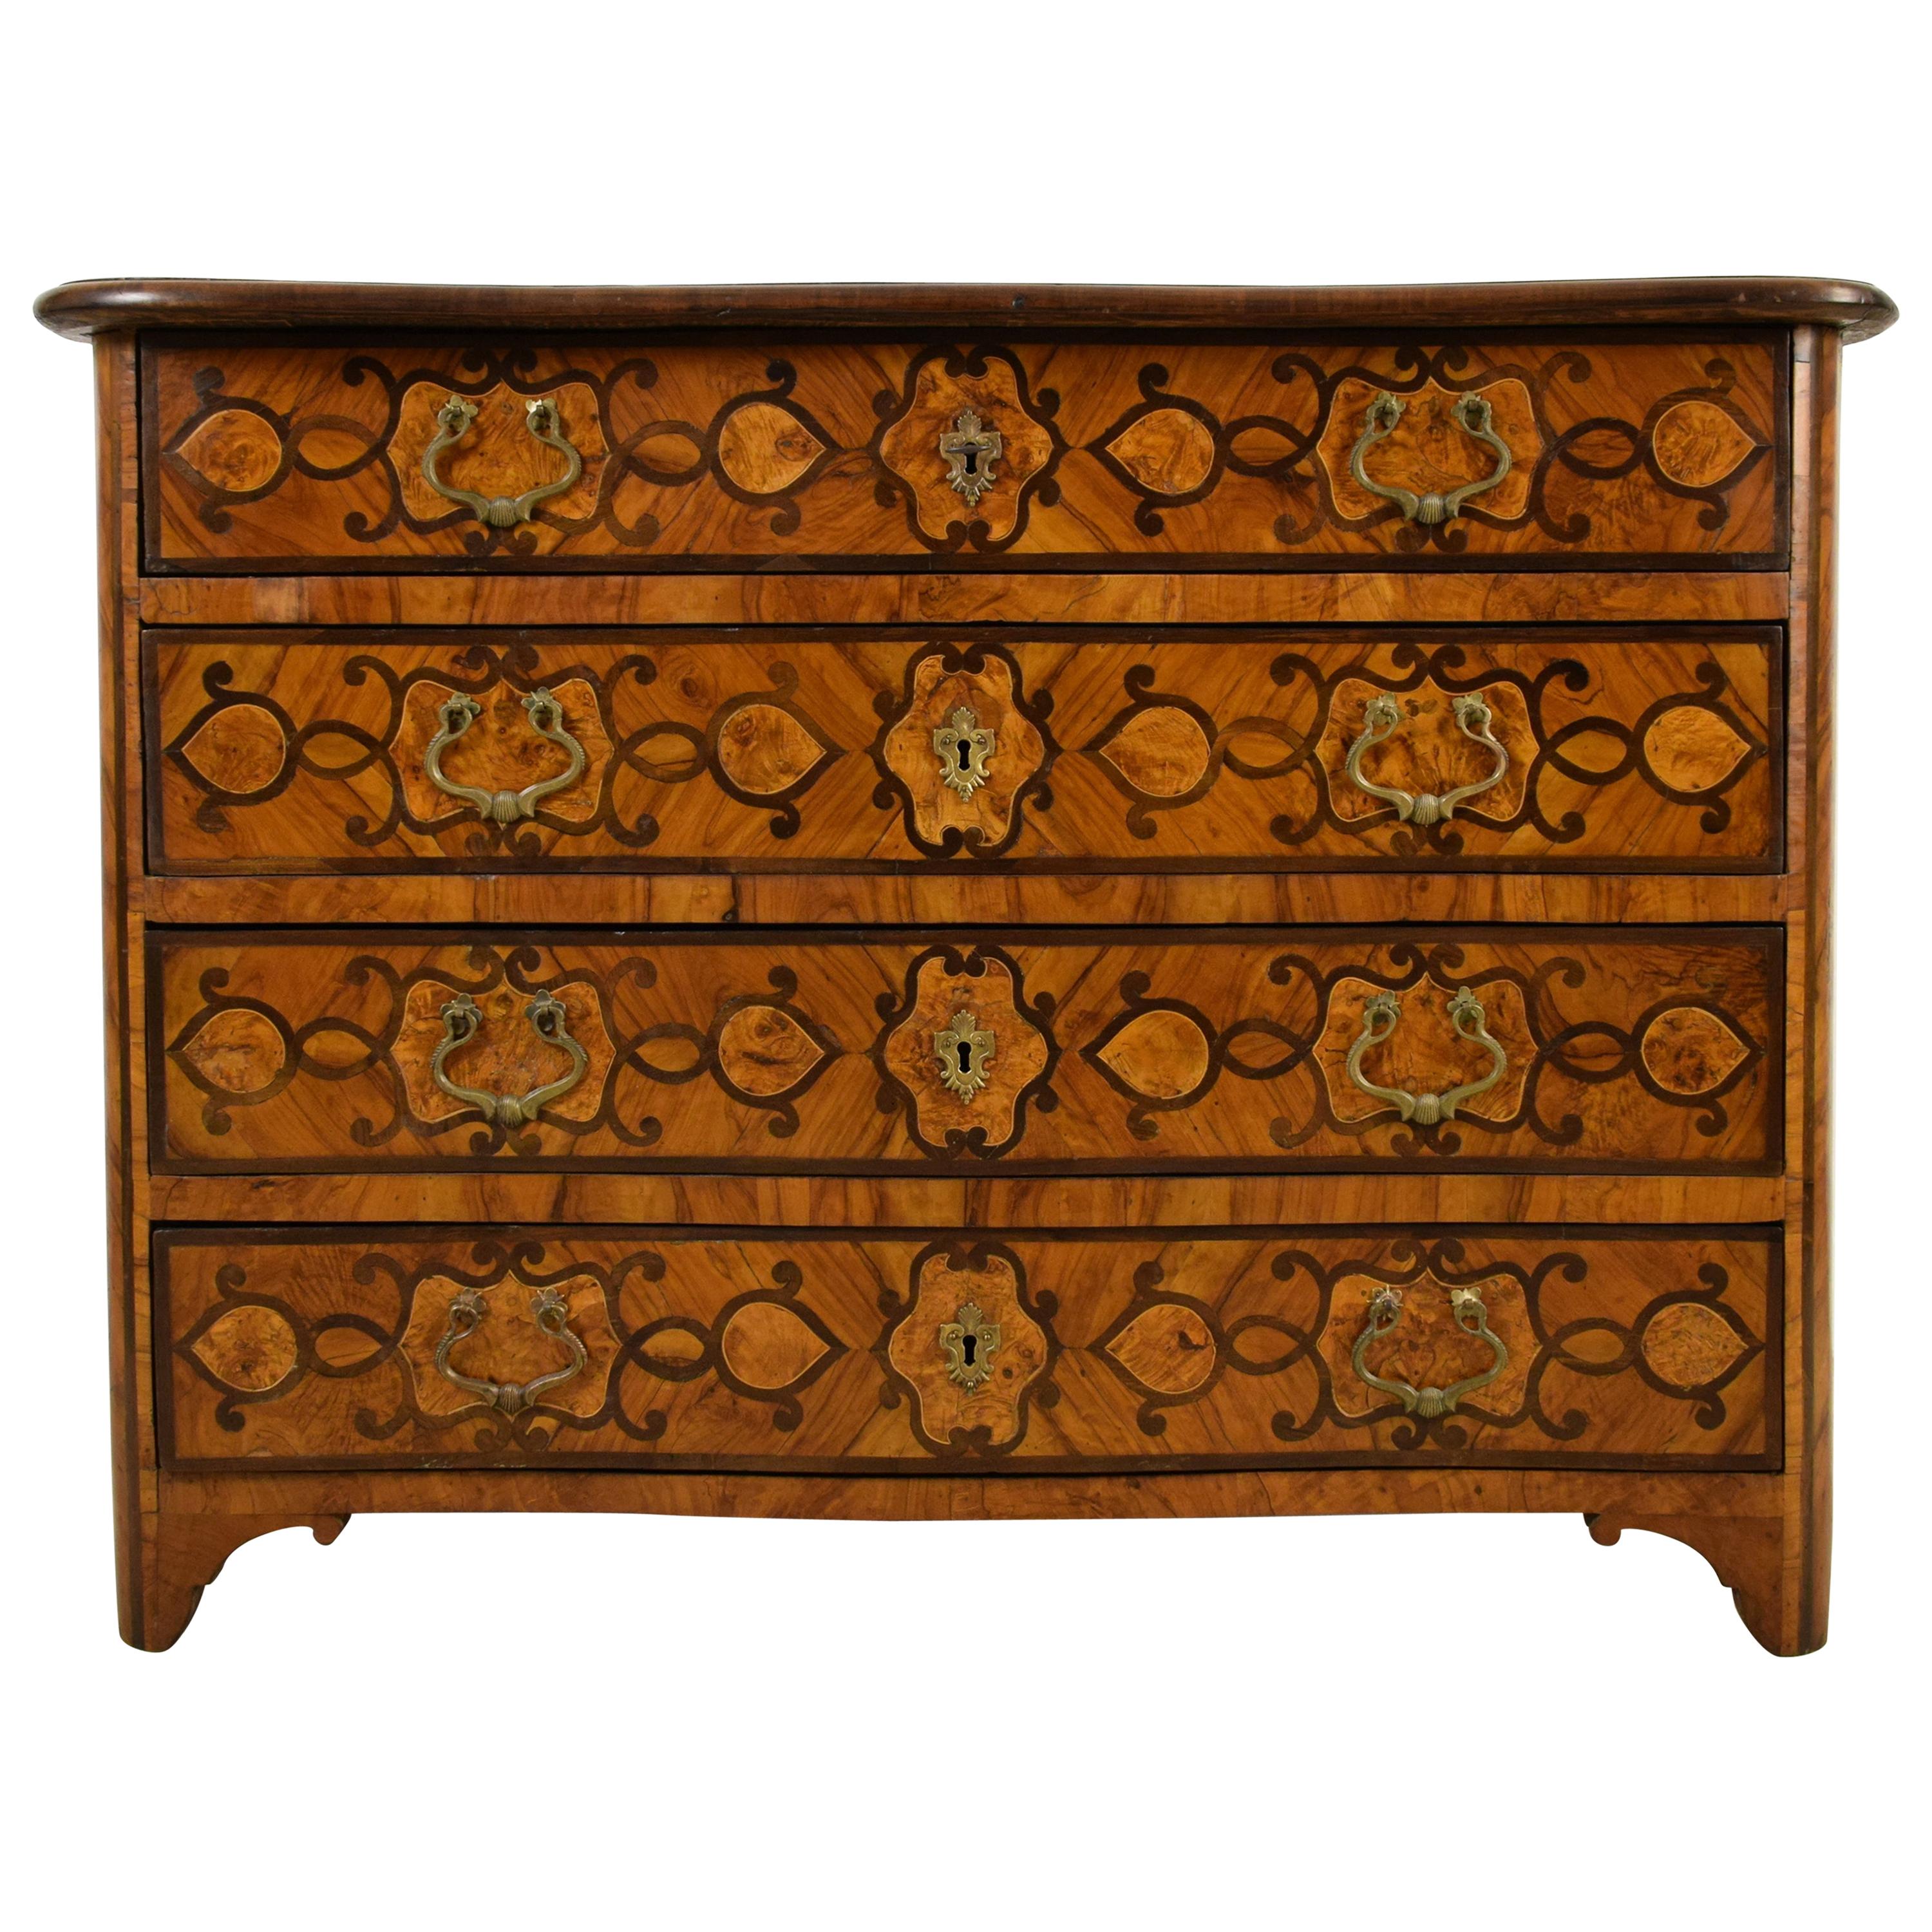 18th Century, Italian Olive Wood Paved and Inlaid Chest of Drawers For Sale